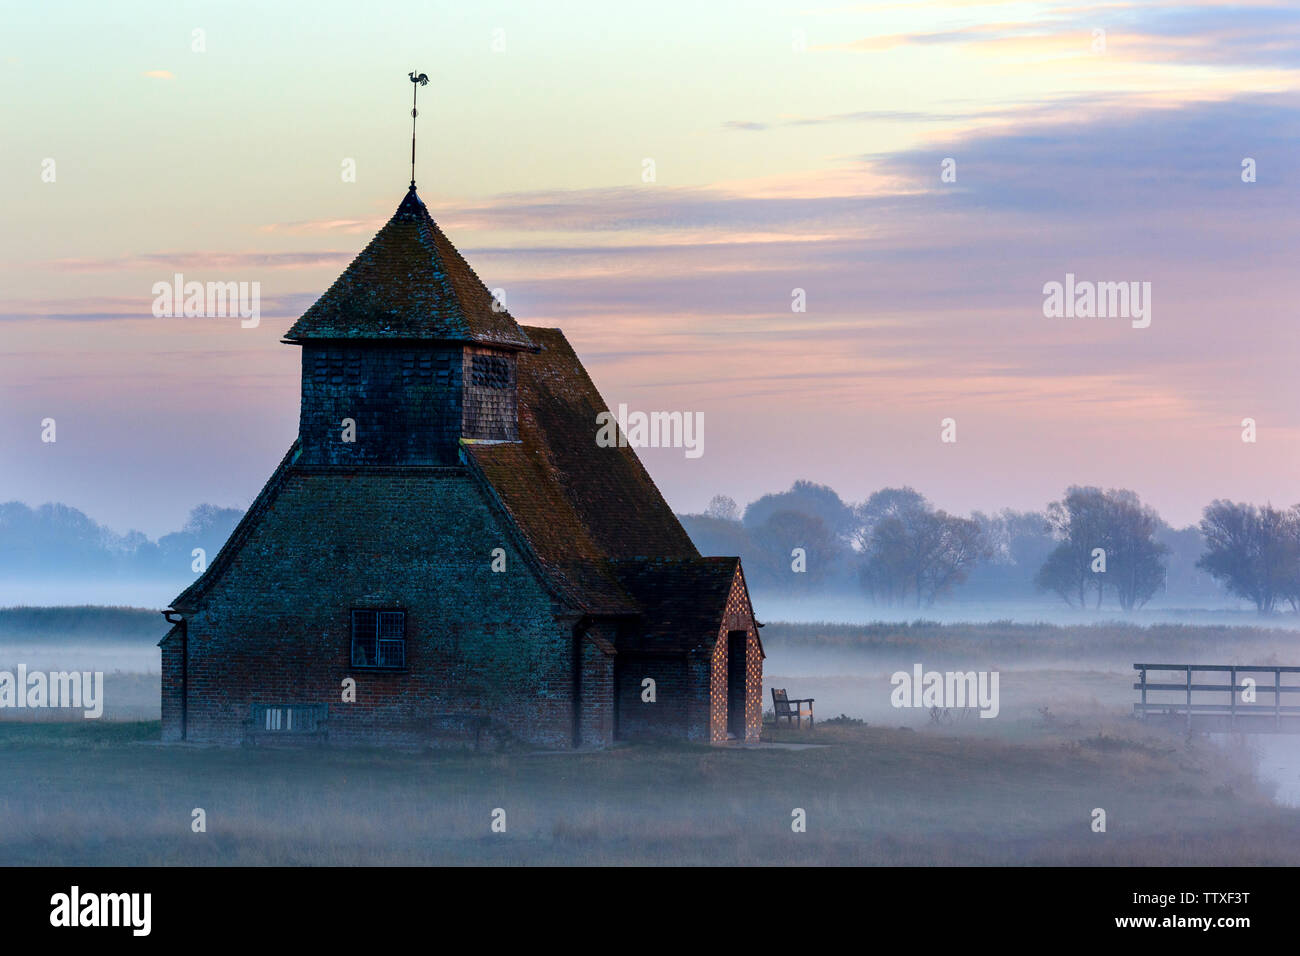 St Thomas Becket church on Romney Marsh. The Church on the marsh at sunup. Sunrise behind clouds, mist on the ground with remote building. Autumn. Stock Photo